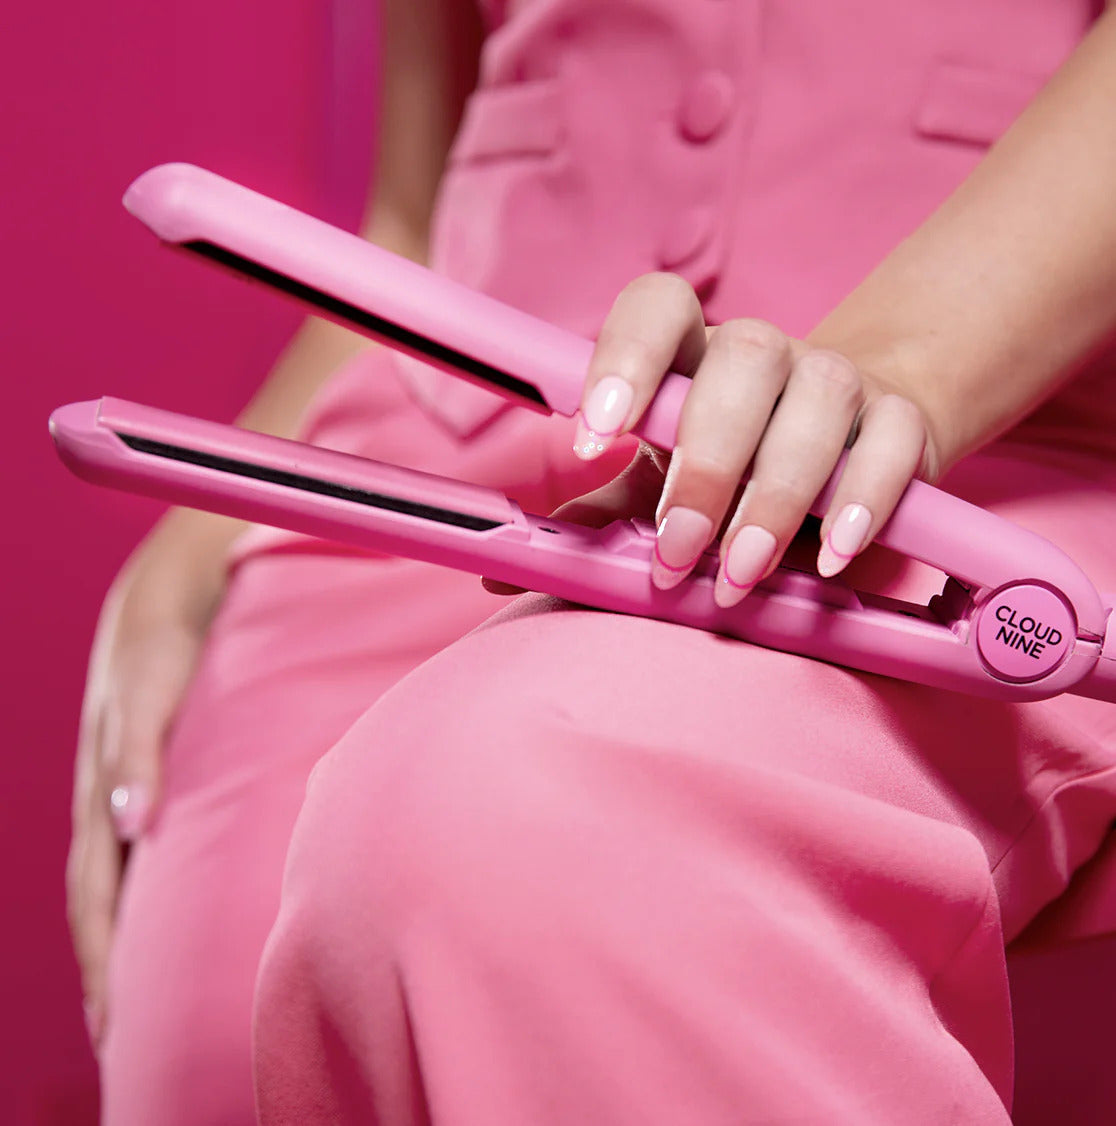 Model in all pink outfit holding a pink CLOUD NINE hair straightener on knee.